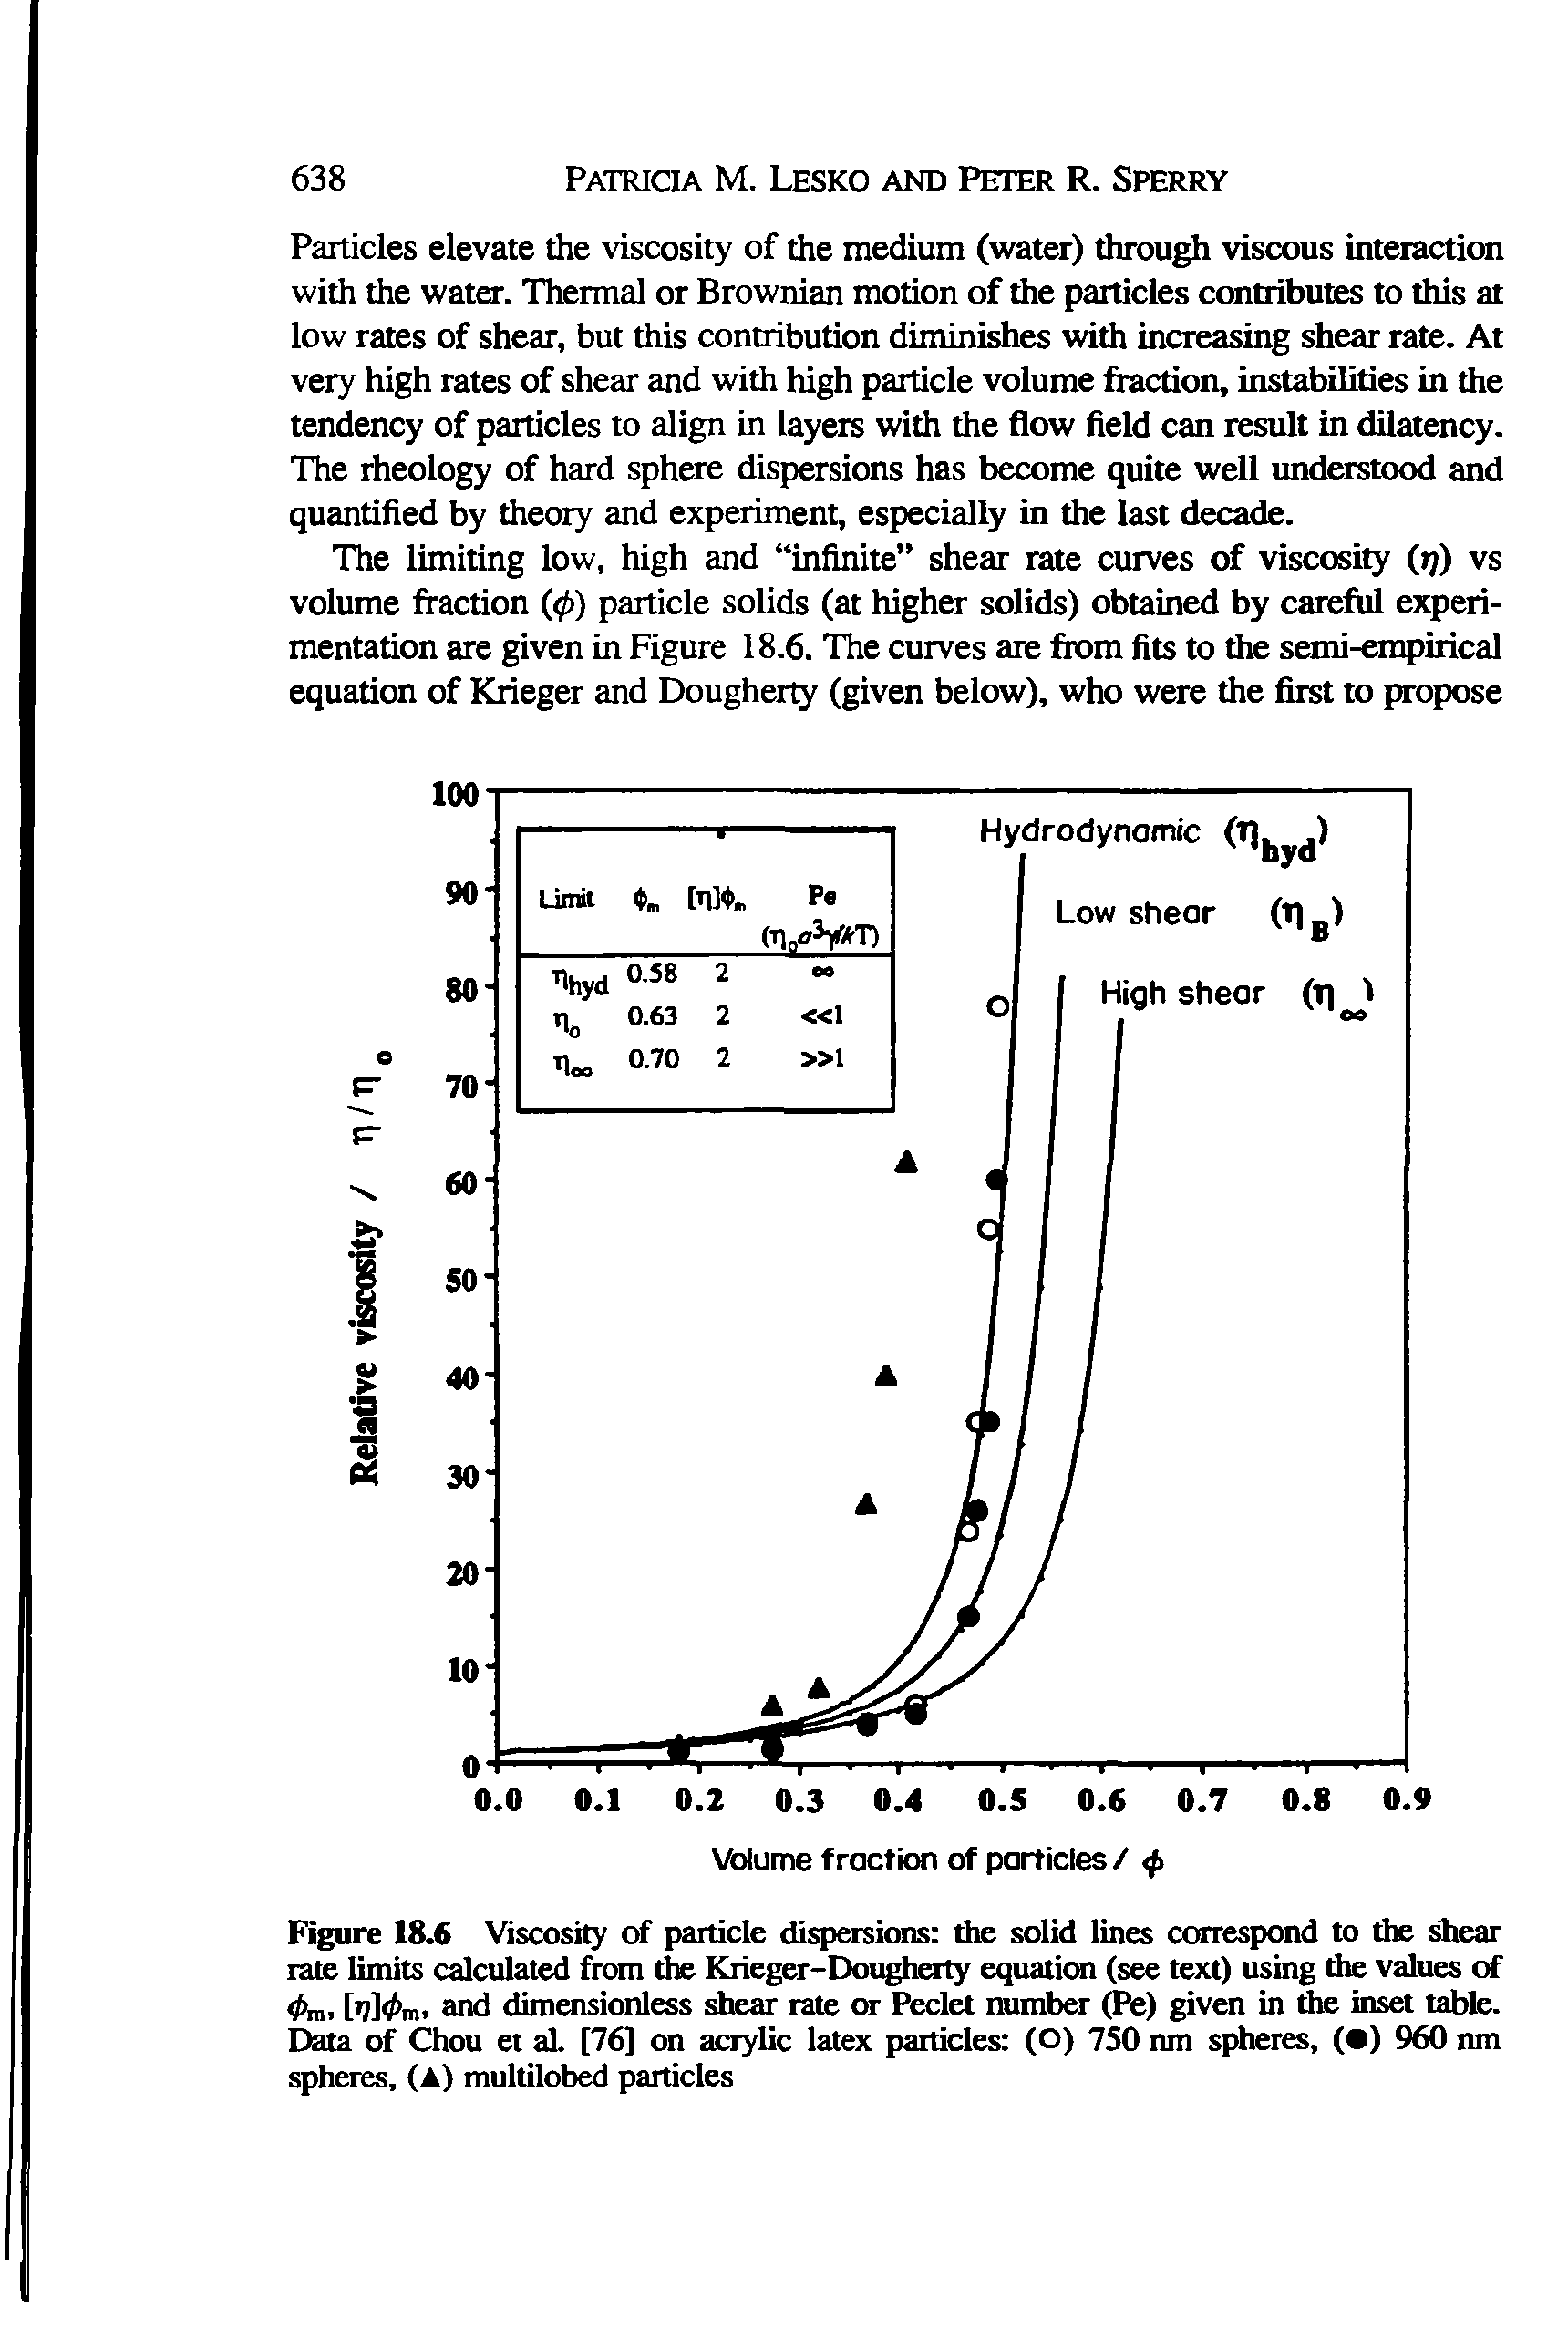 Figure 18.6 Viscosity of particle dispersions the solid lines correspond to the shear rate limits calculated from the Krieger-Dougheity equation (see text) using the values of and dimensionless shear rate or Peclet number (Pe) given in the inset table, of Chou et aL [76] on acrylic latex particles (O) 7S0 nm spheres, ( ) 960 run spheres, (A) multilob particles...